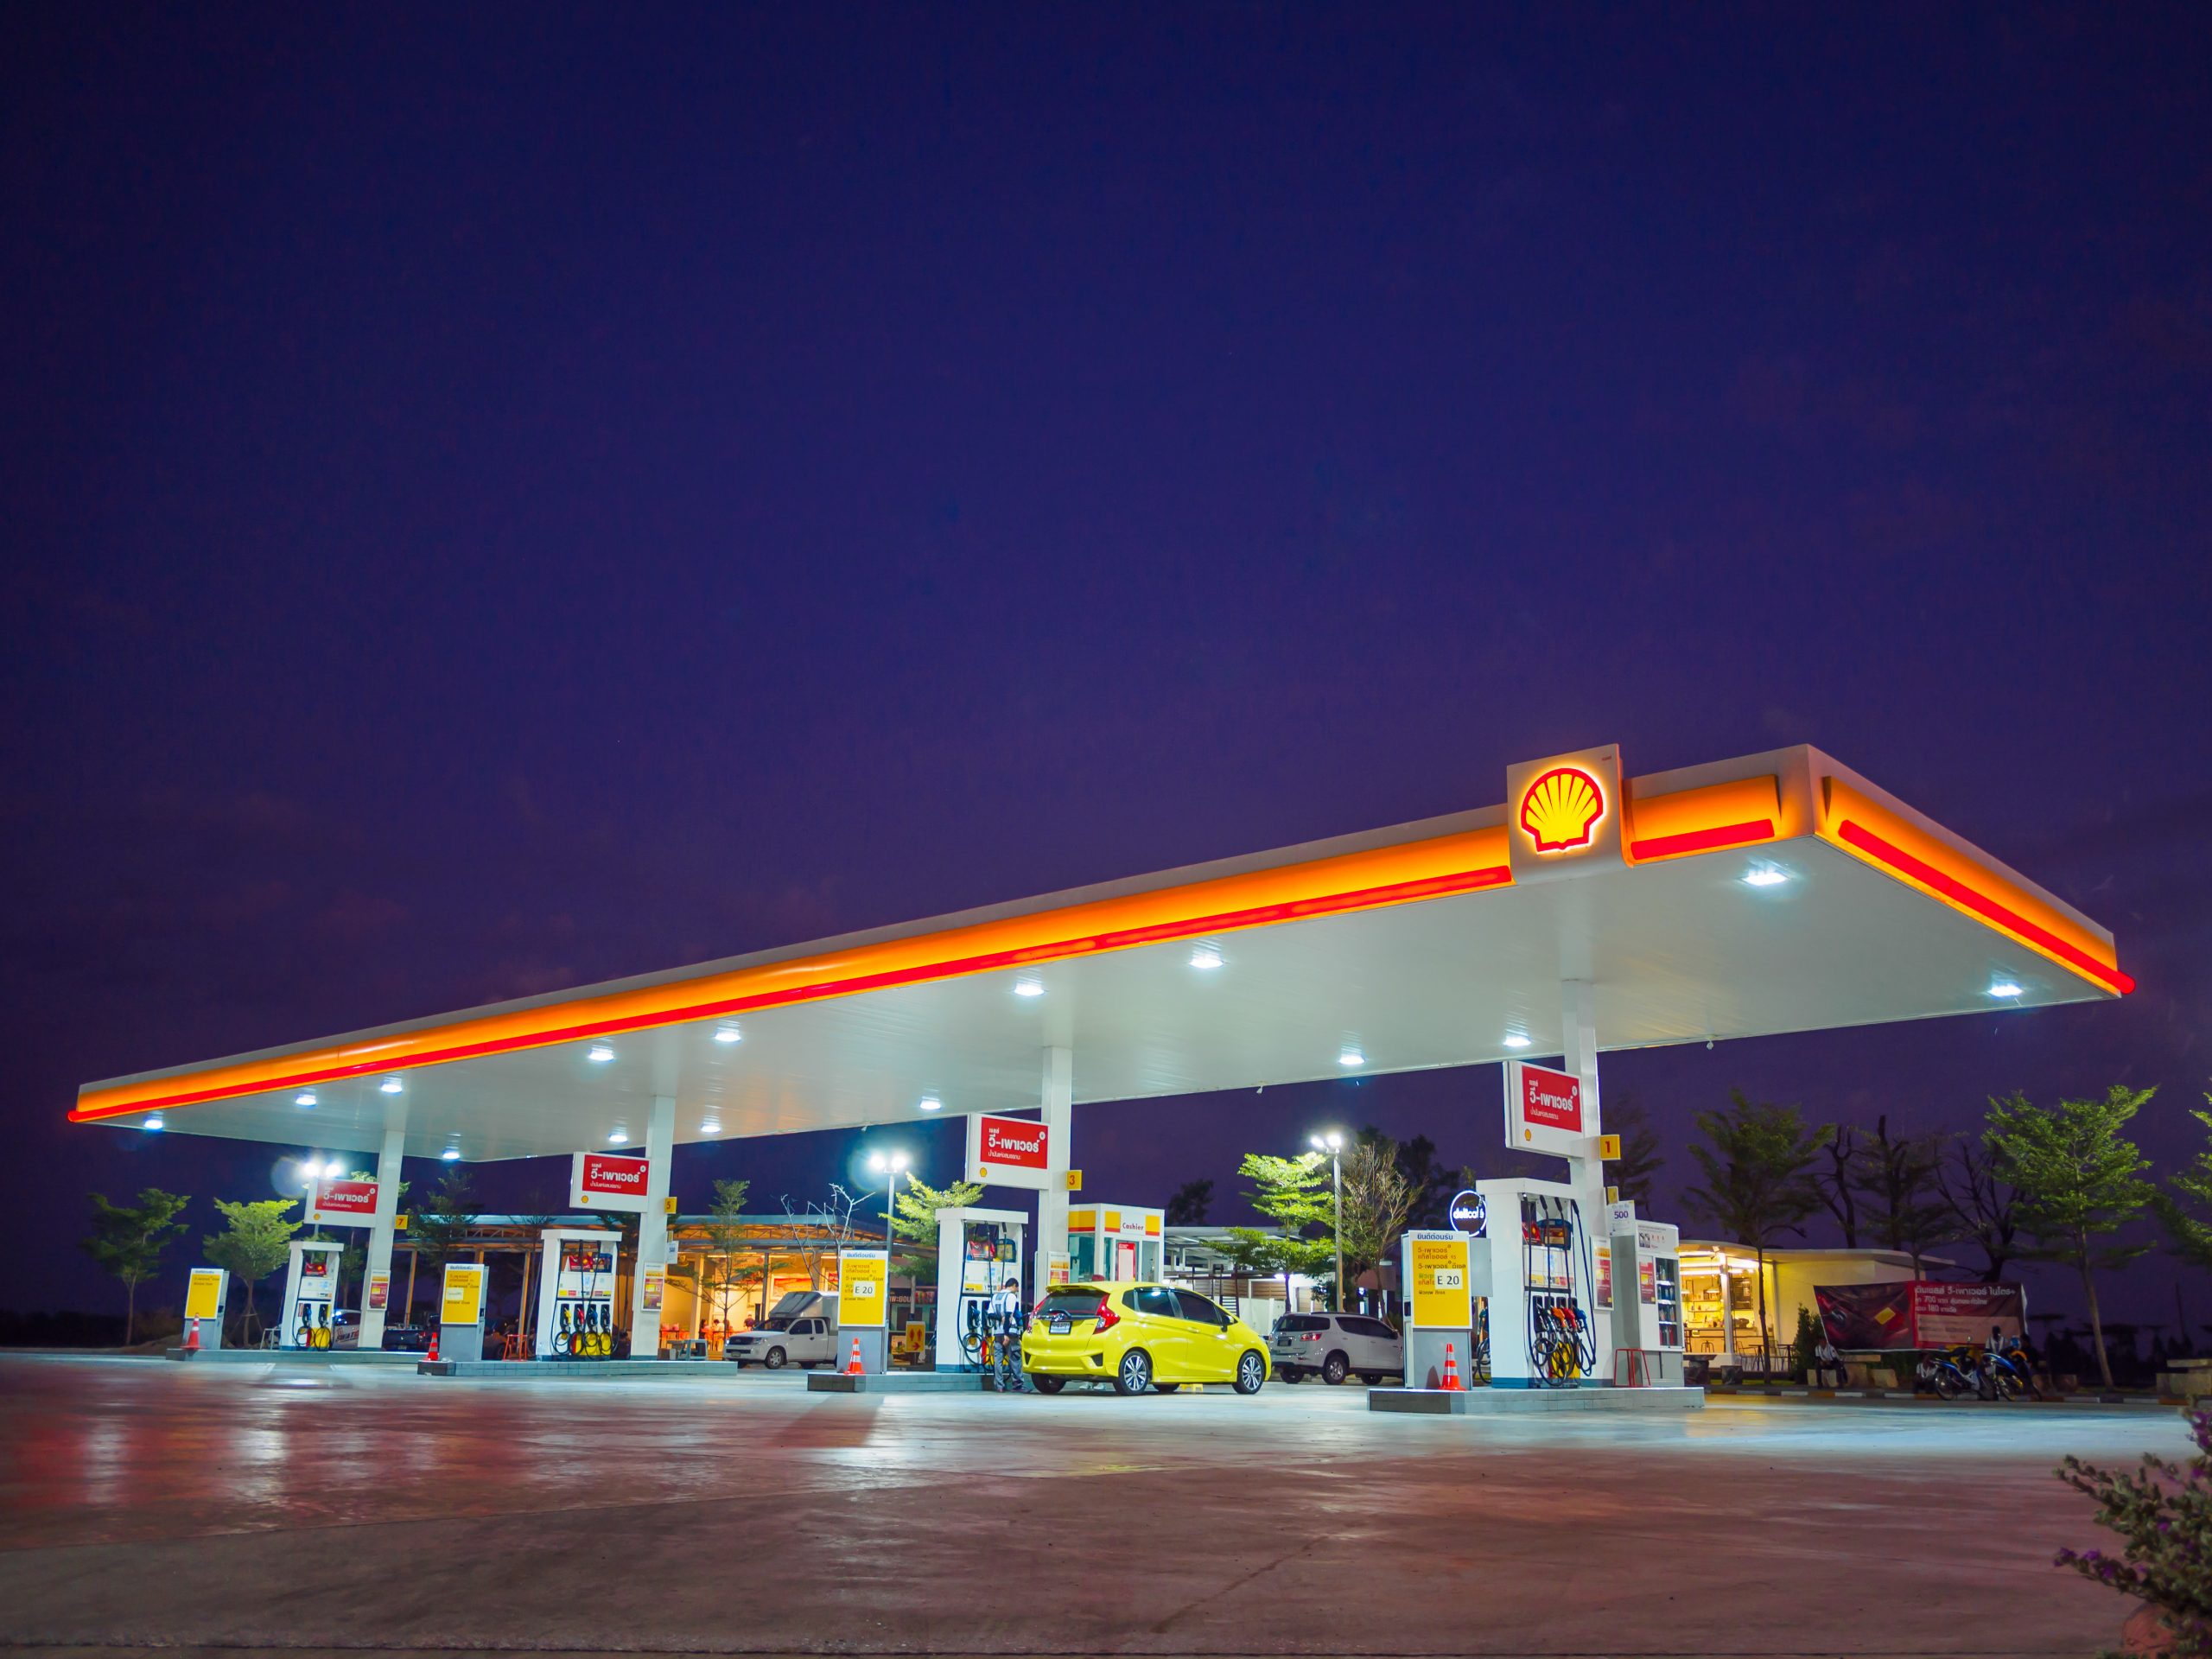 Shell Acquires 248 Landmark Convenience and Fuel Stores